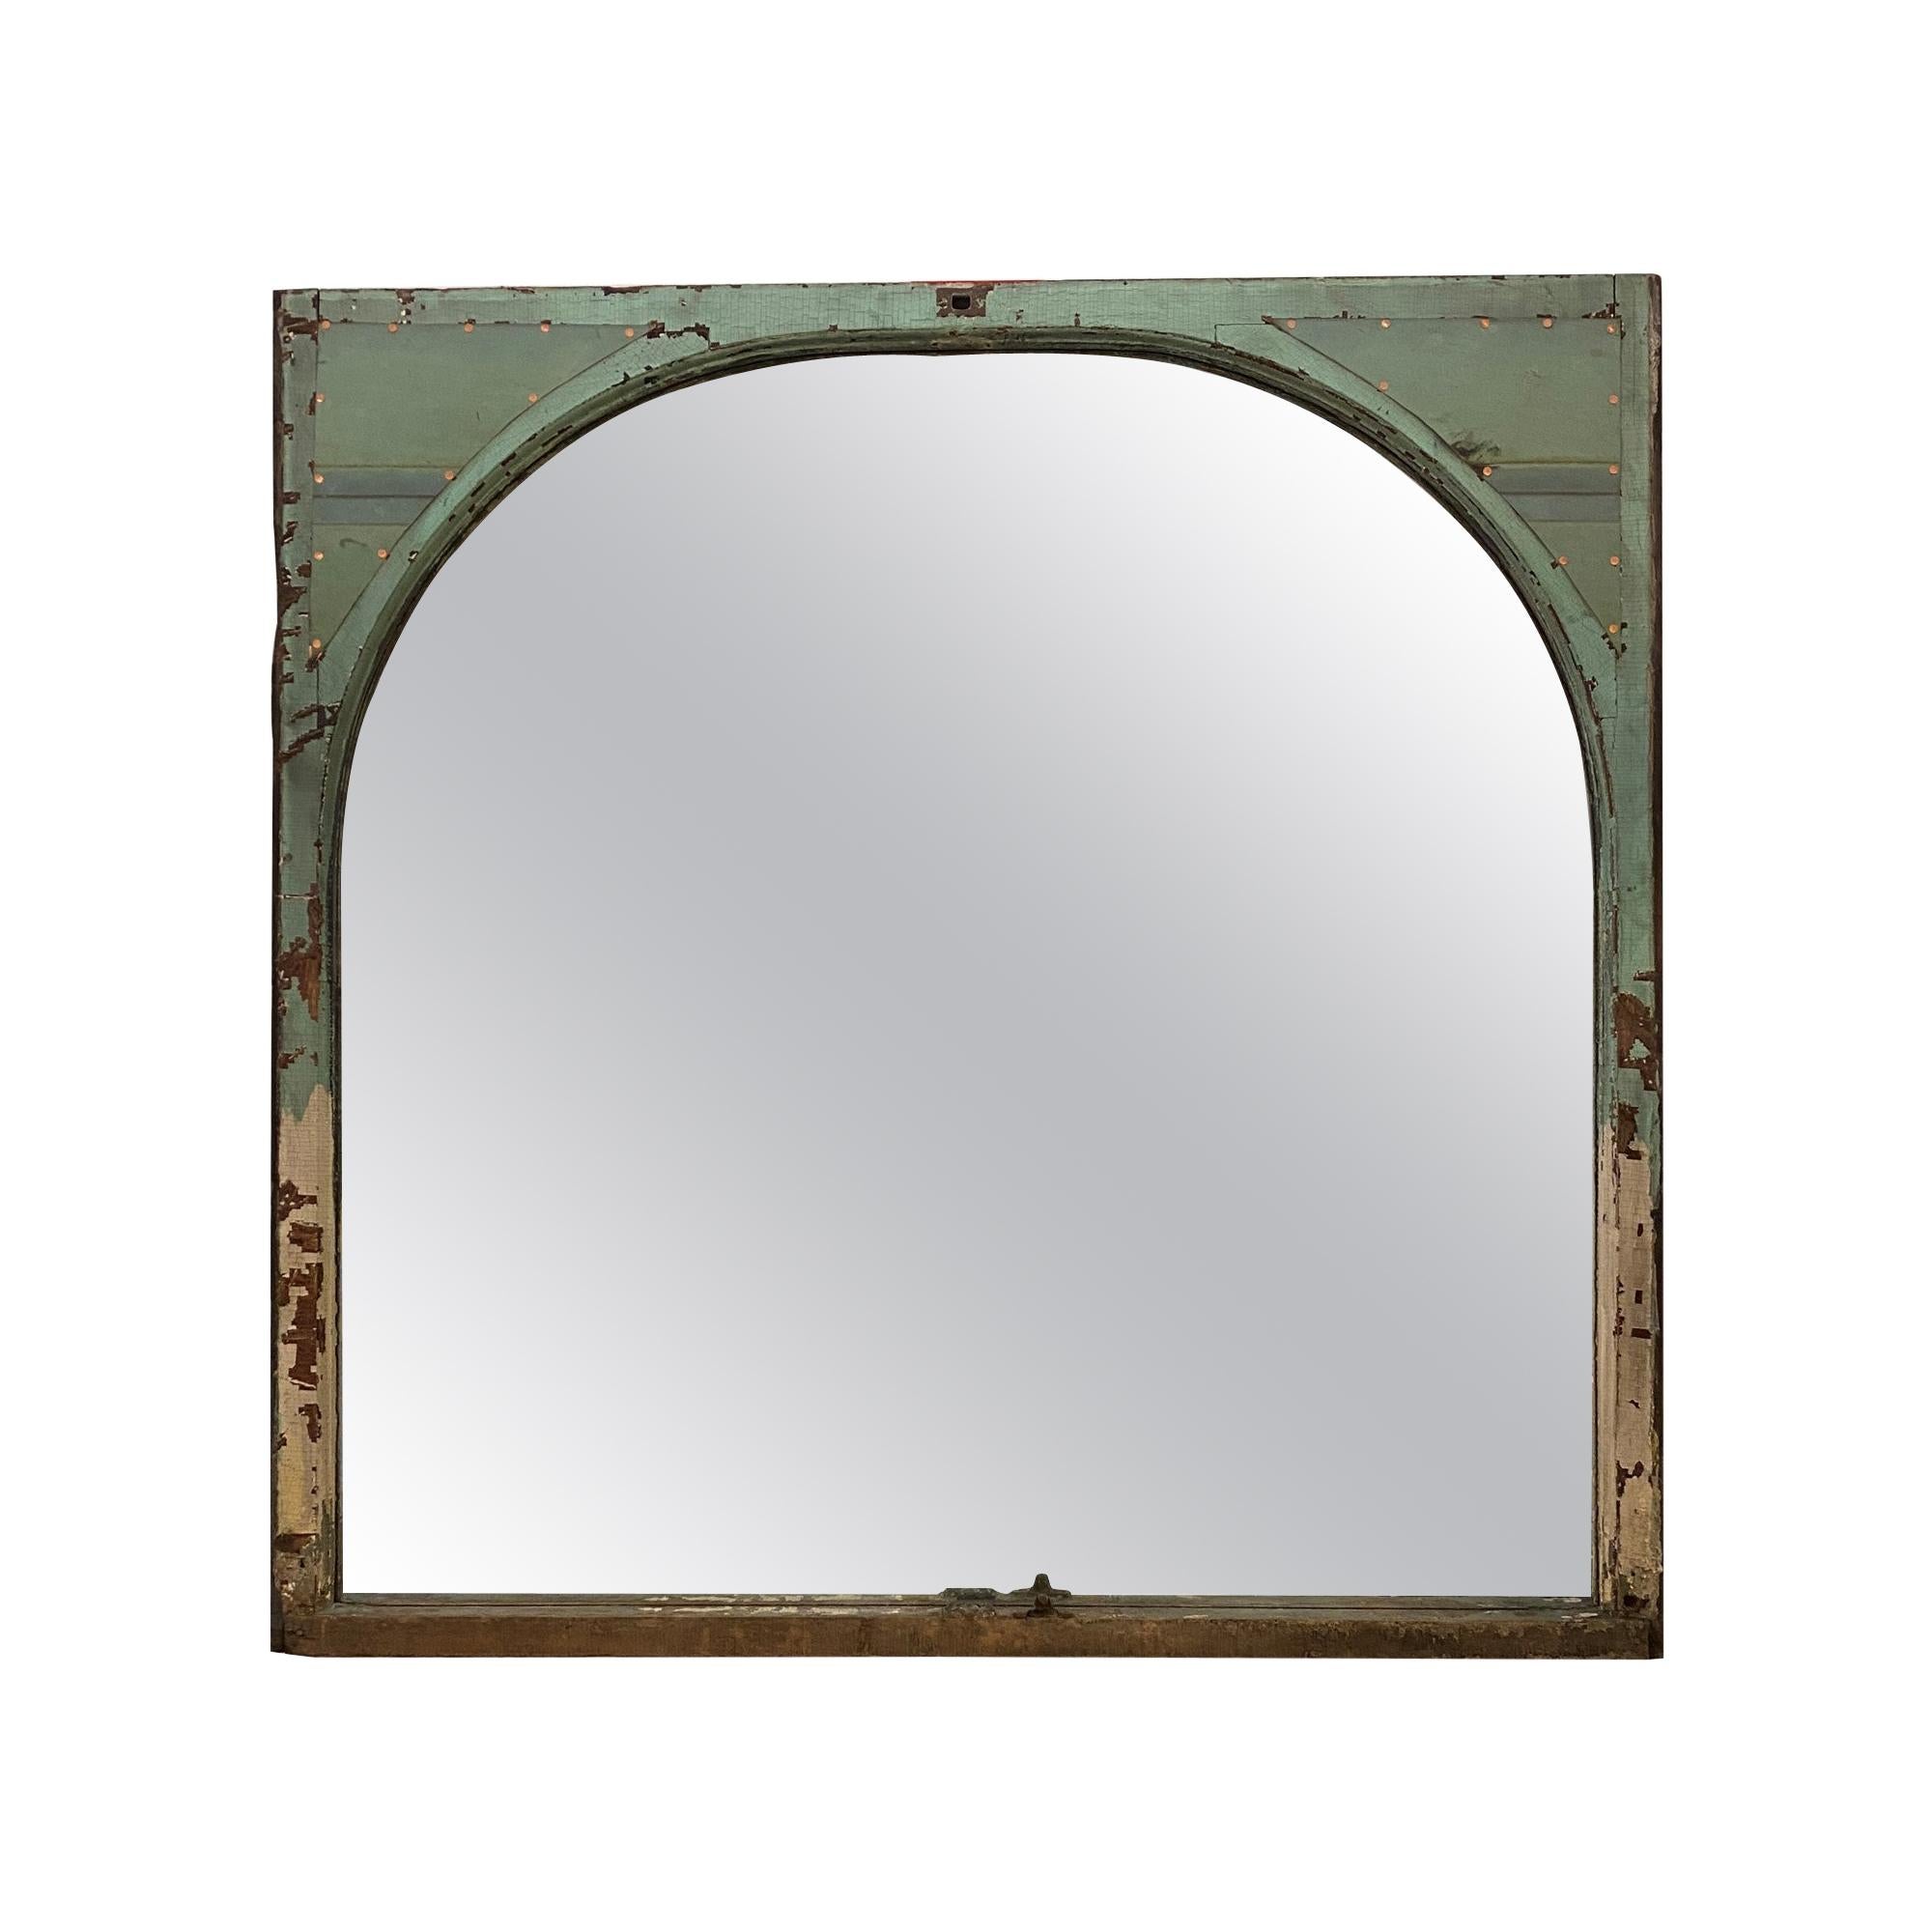 Early 20th C. Arched Wood Window Mirror with Copper Details